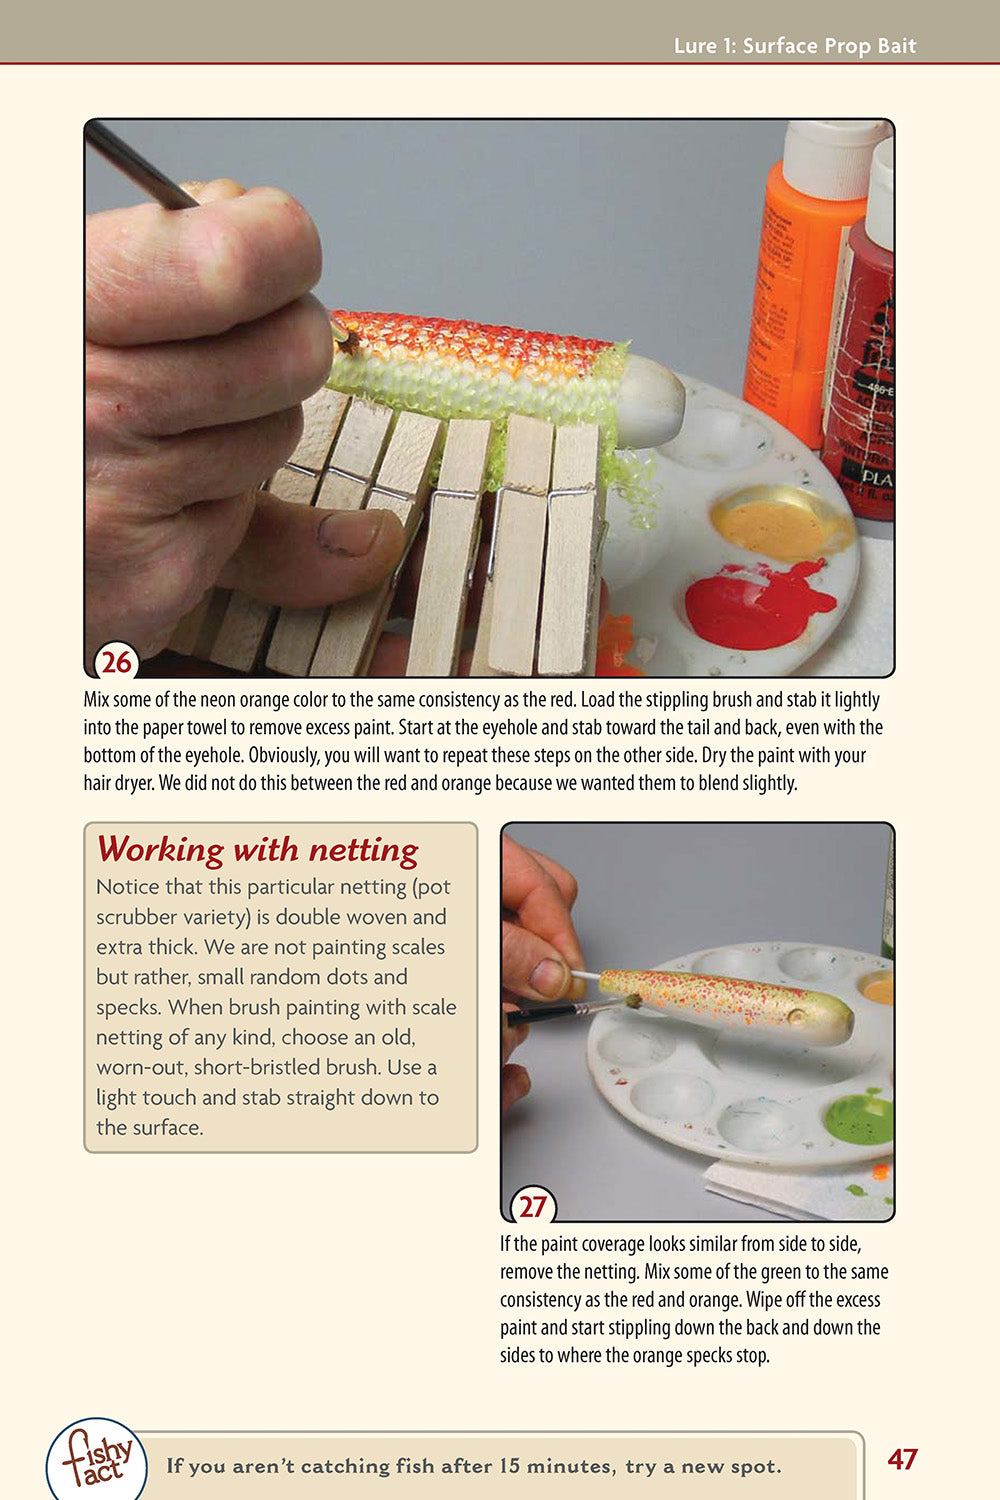 Lure building, painting and tackle craft - Tools - Page 1 - Cedar